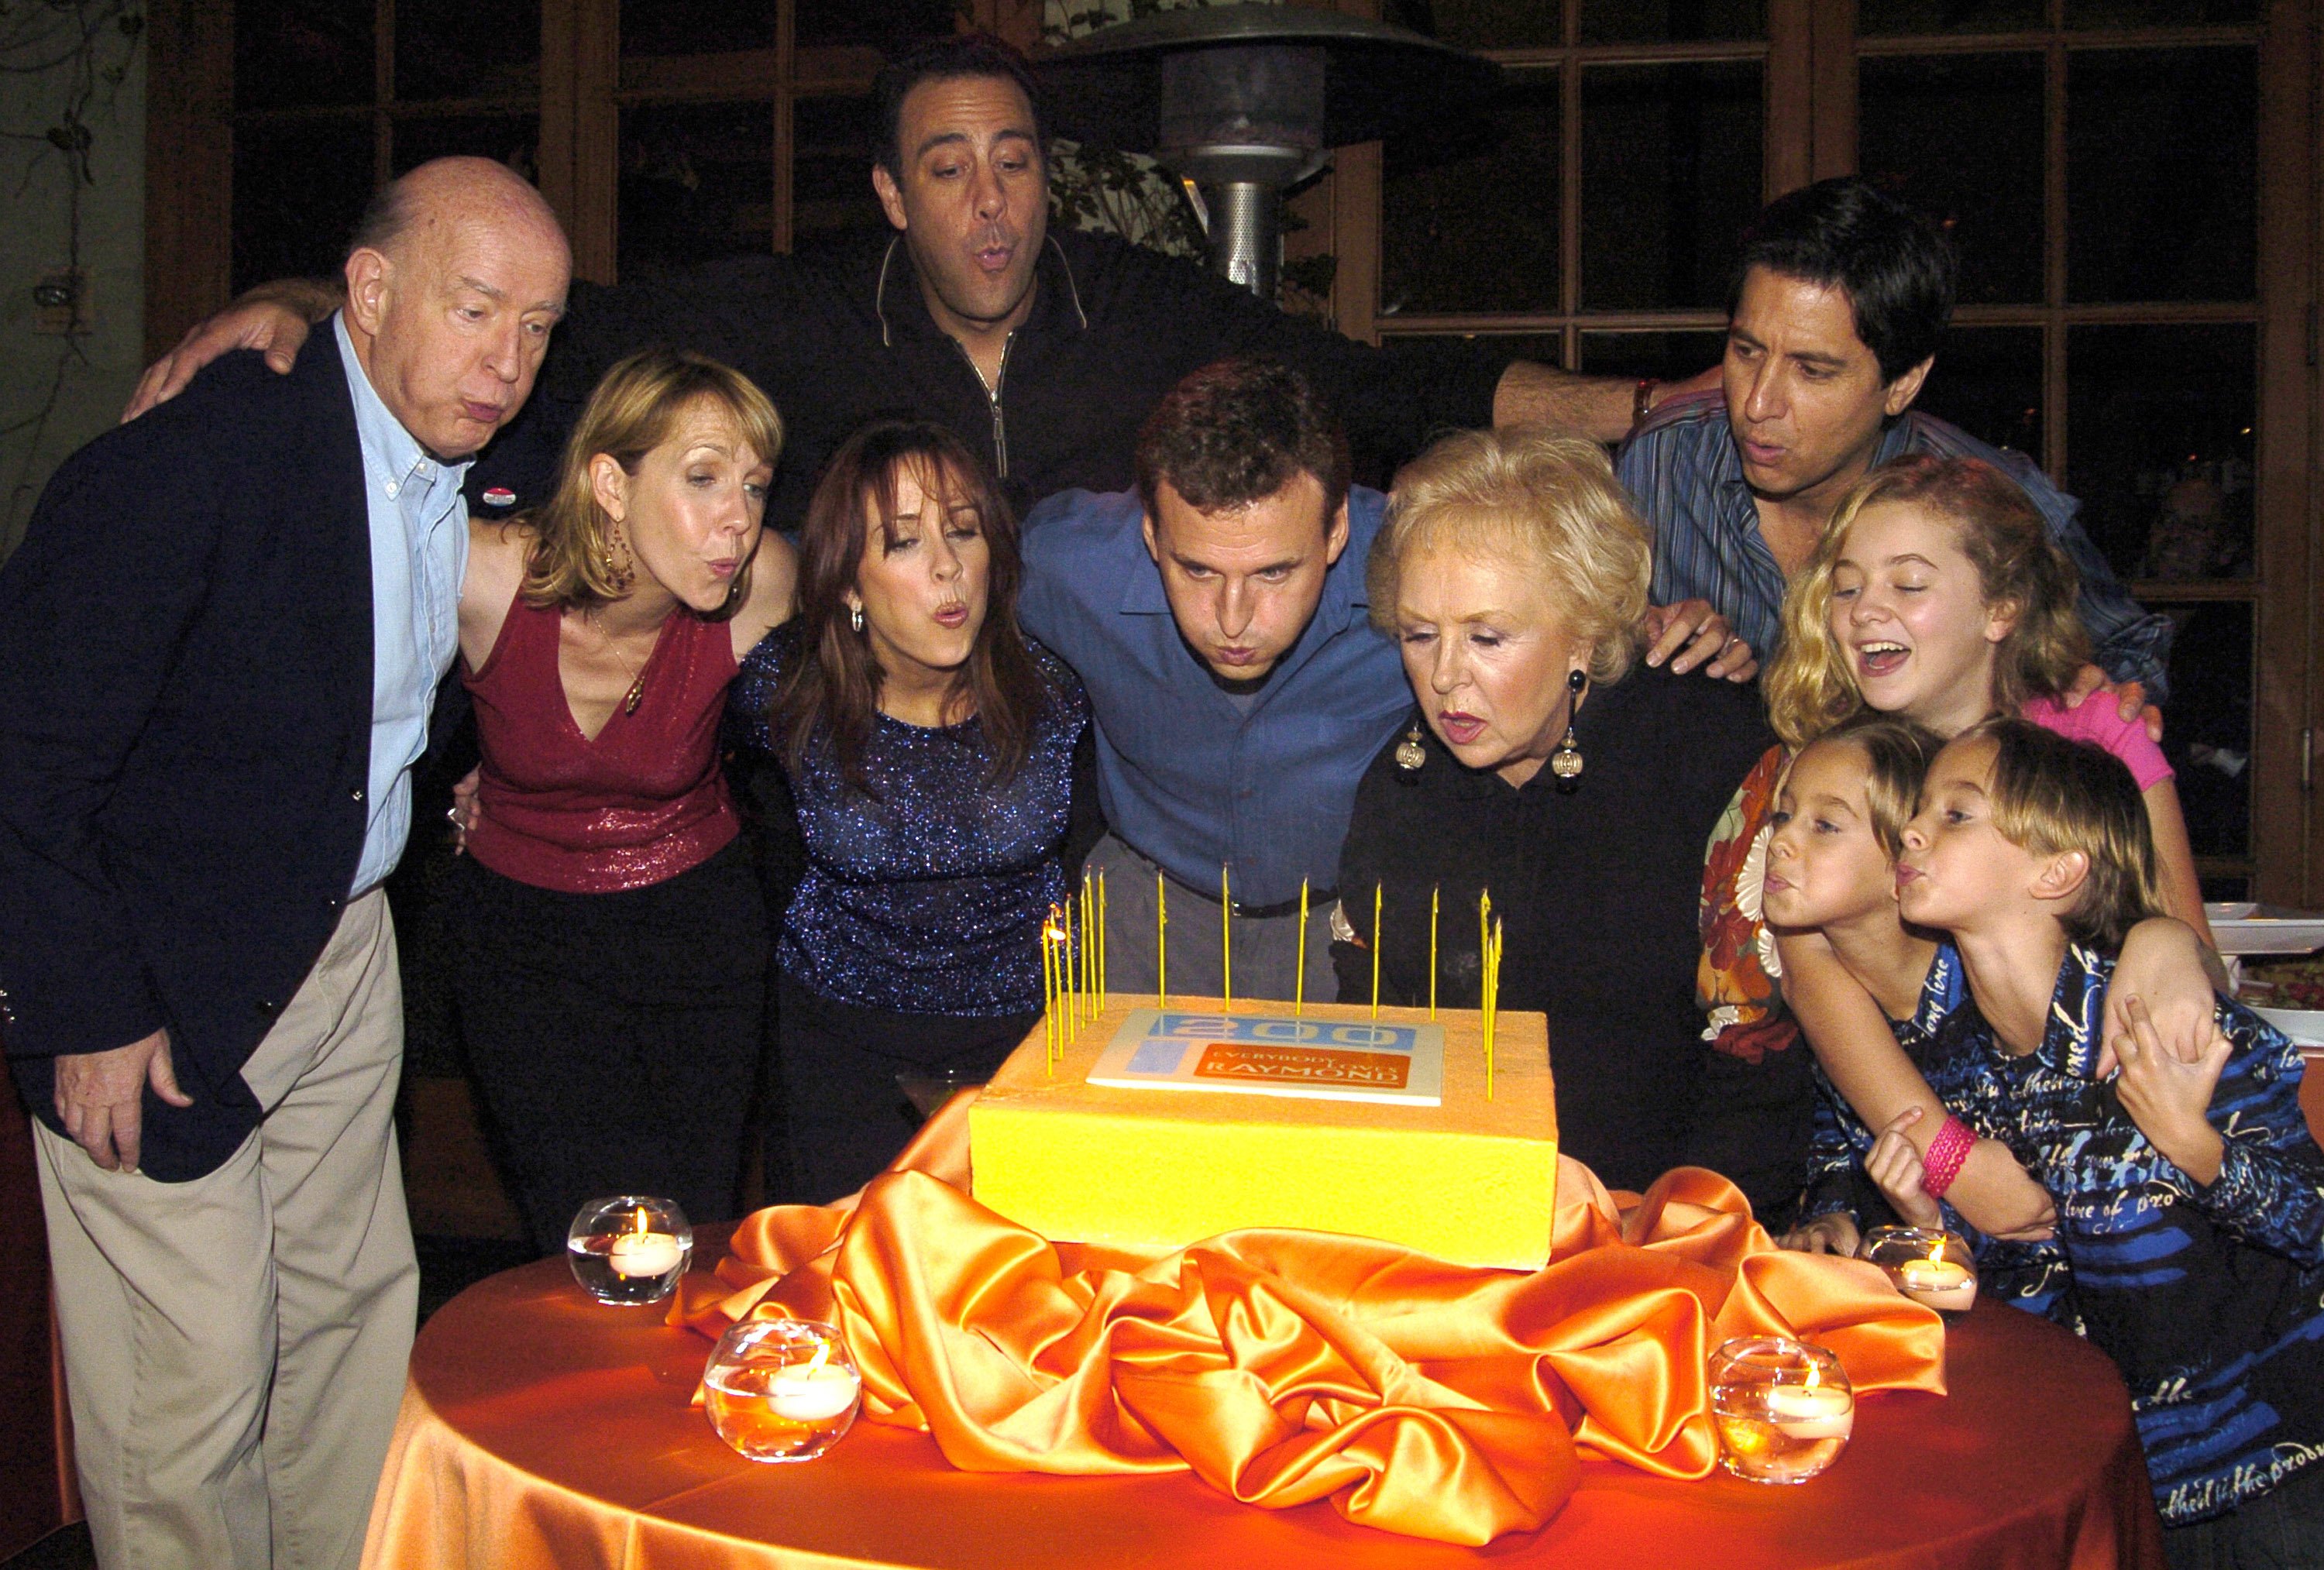 'Everybody Loves Raymond' executive producer Phil Rosenthal (center) and the show's cast blow out candles on a cake celebrating the comedy's 200th episode in 2004.